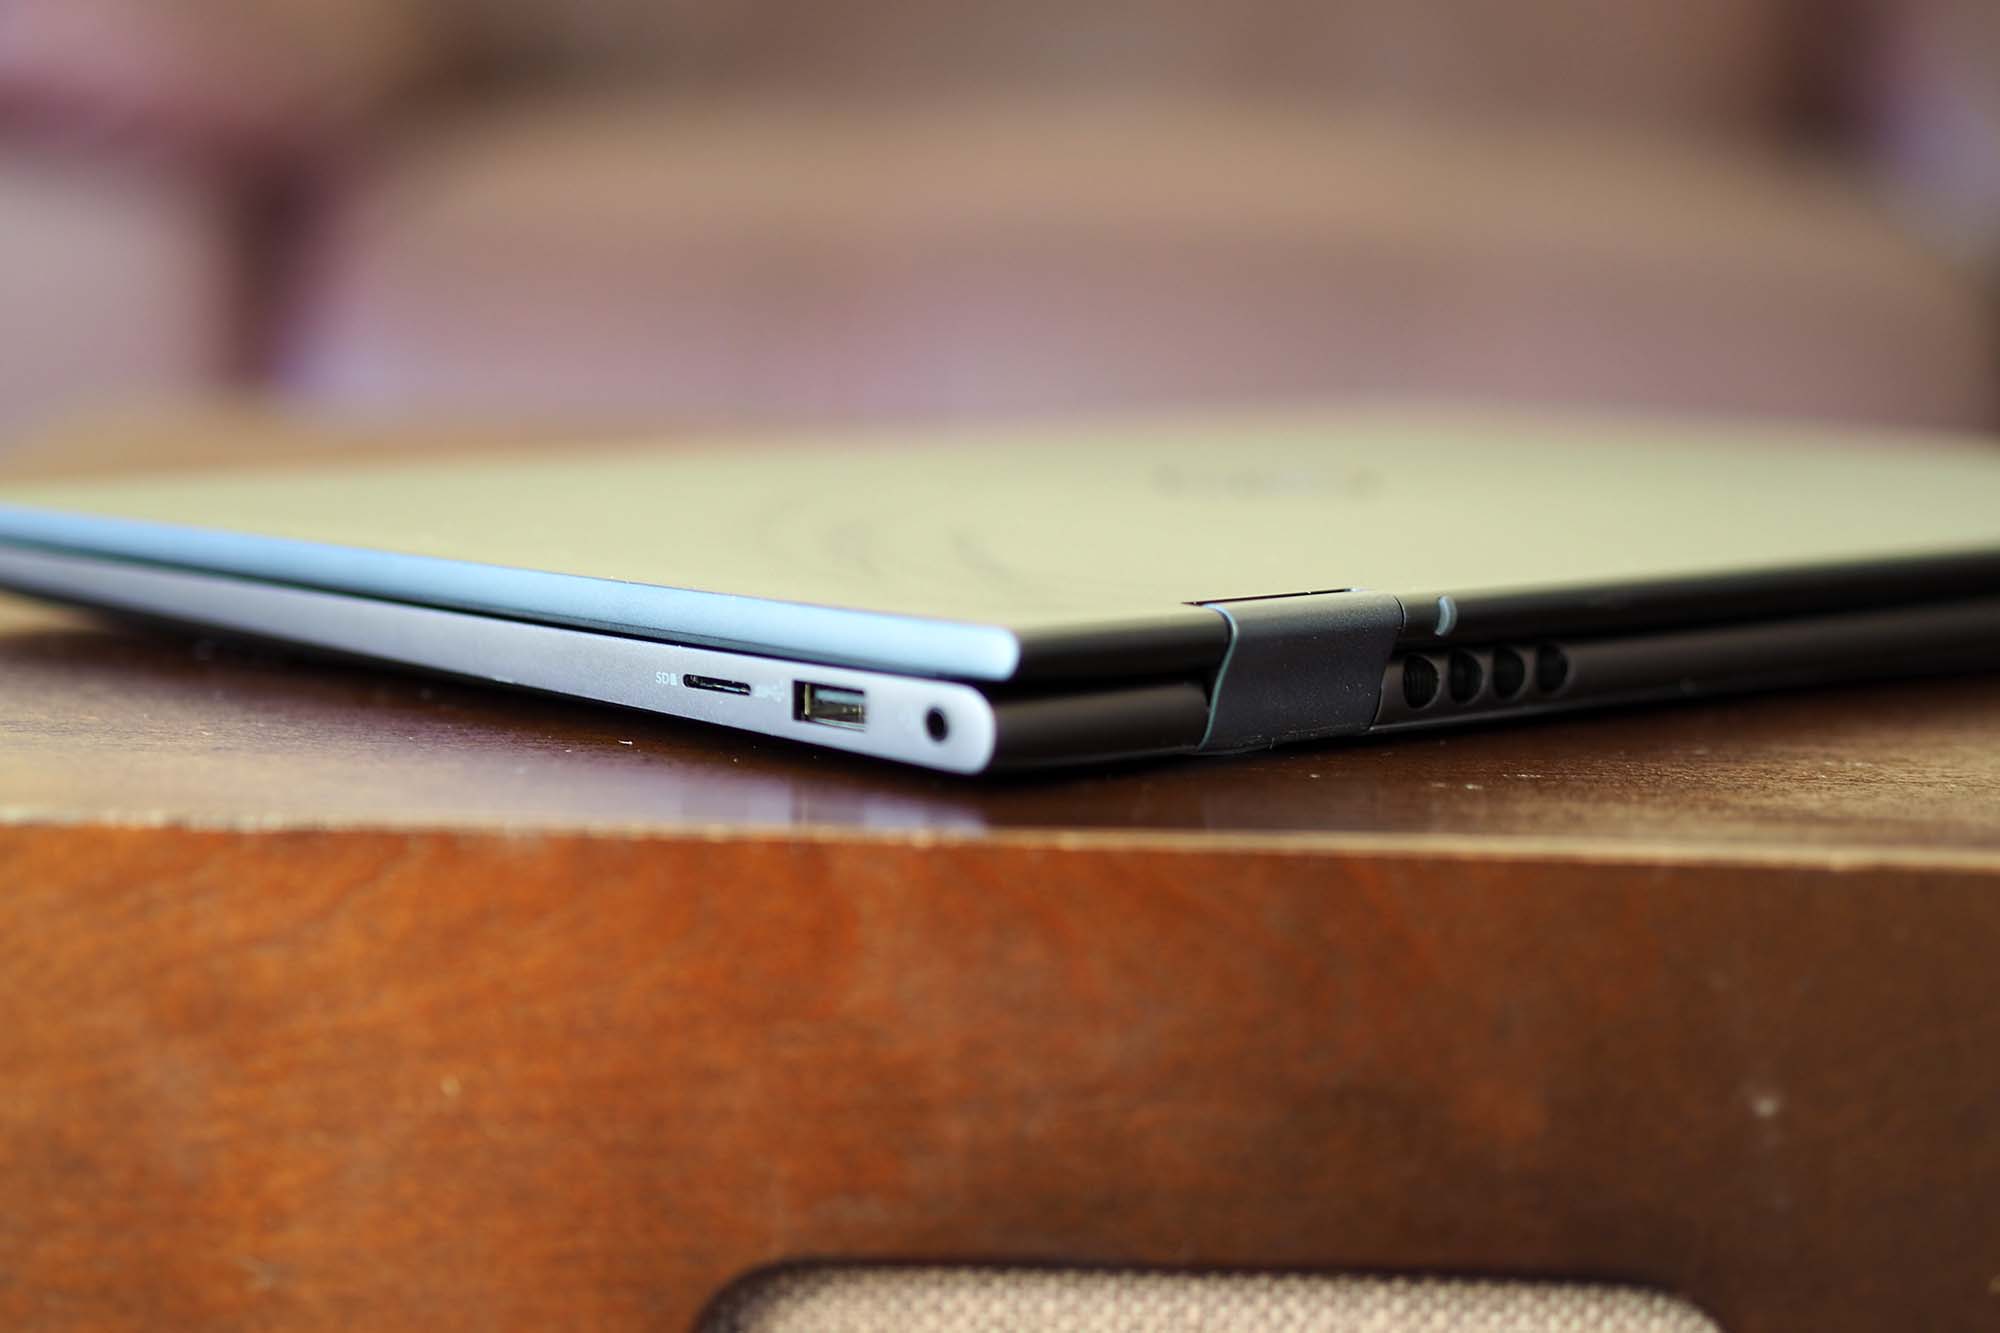 3.2 Gen 1 port, a 3.5mm audio jack, and a microSD card reader along the right-hand side of the Dell Inspiron 14 2-in-1.